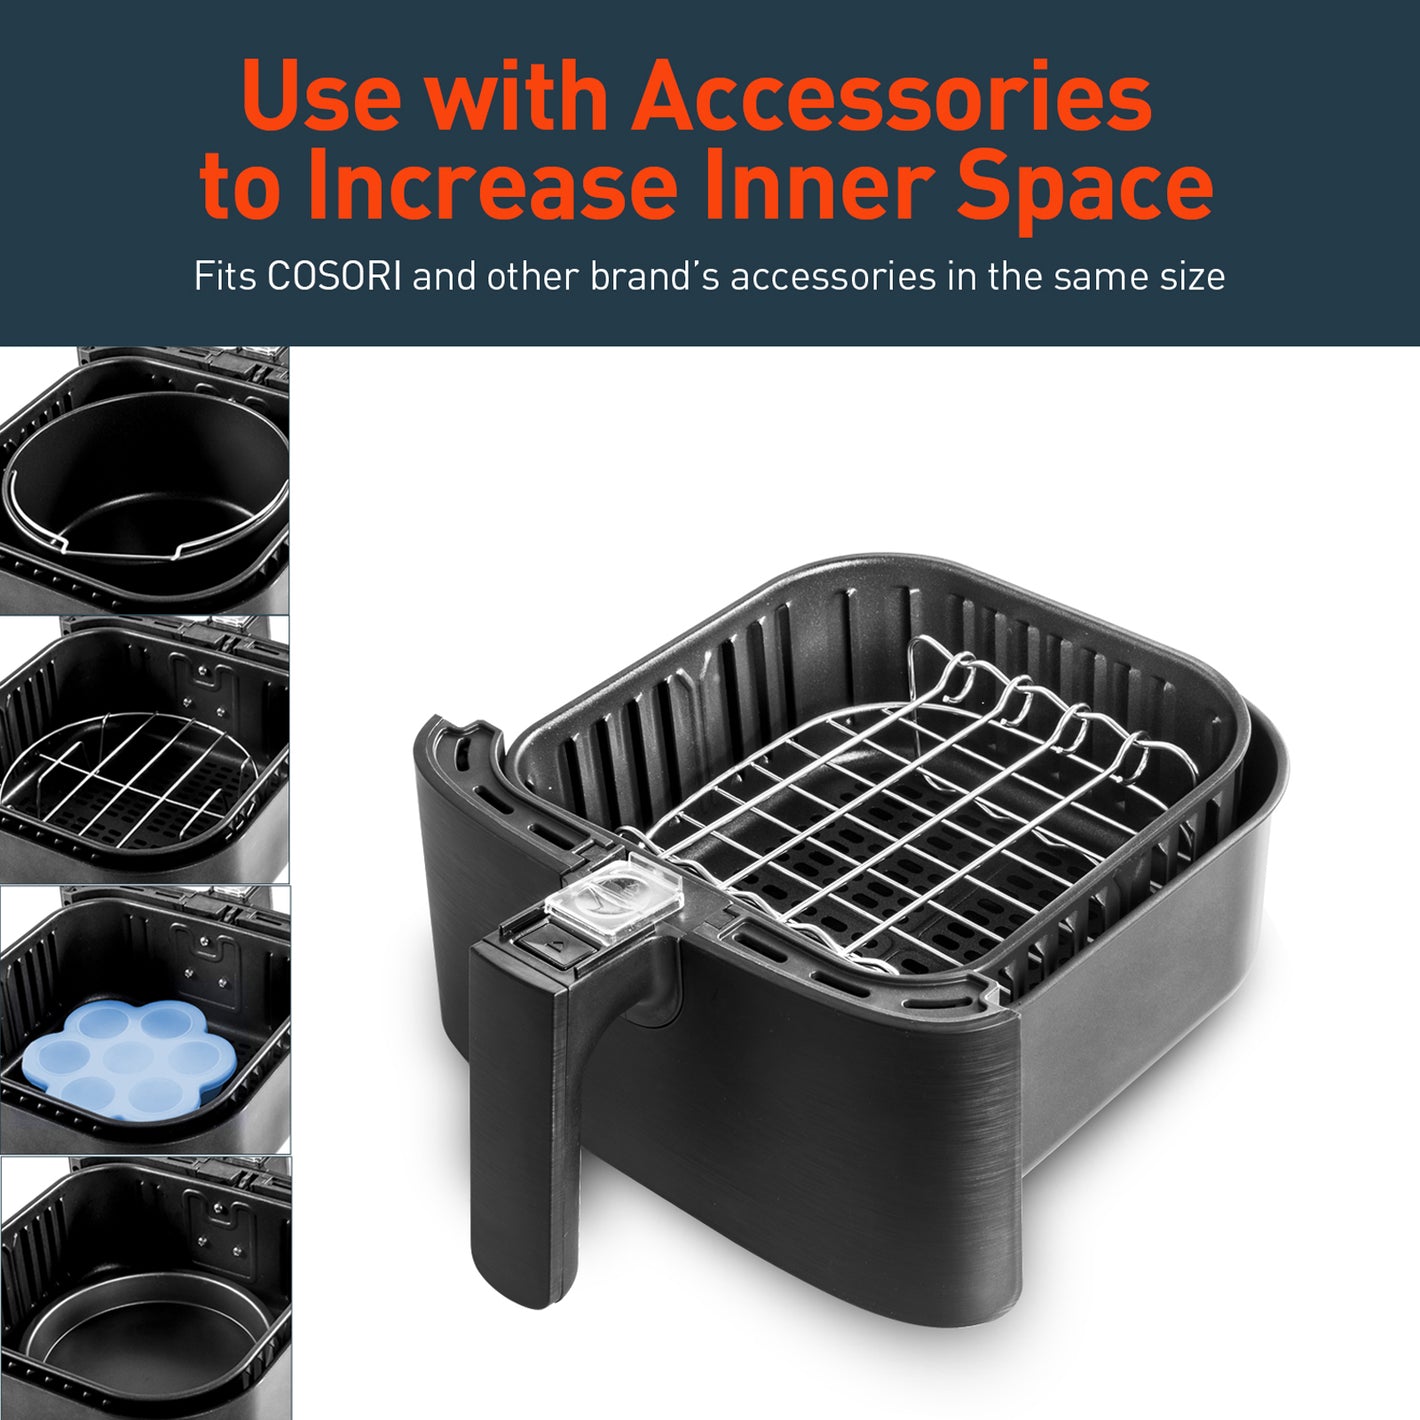 Use with Accessories to Increase Inner Space Fits COSORI and other brand's accessories in the same size